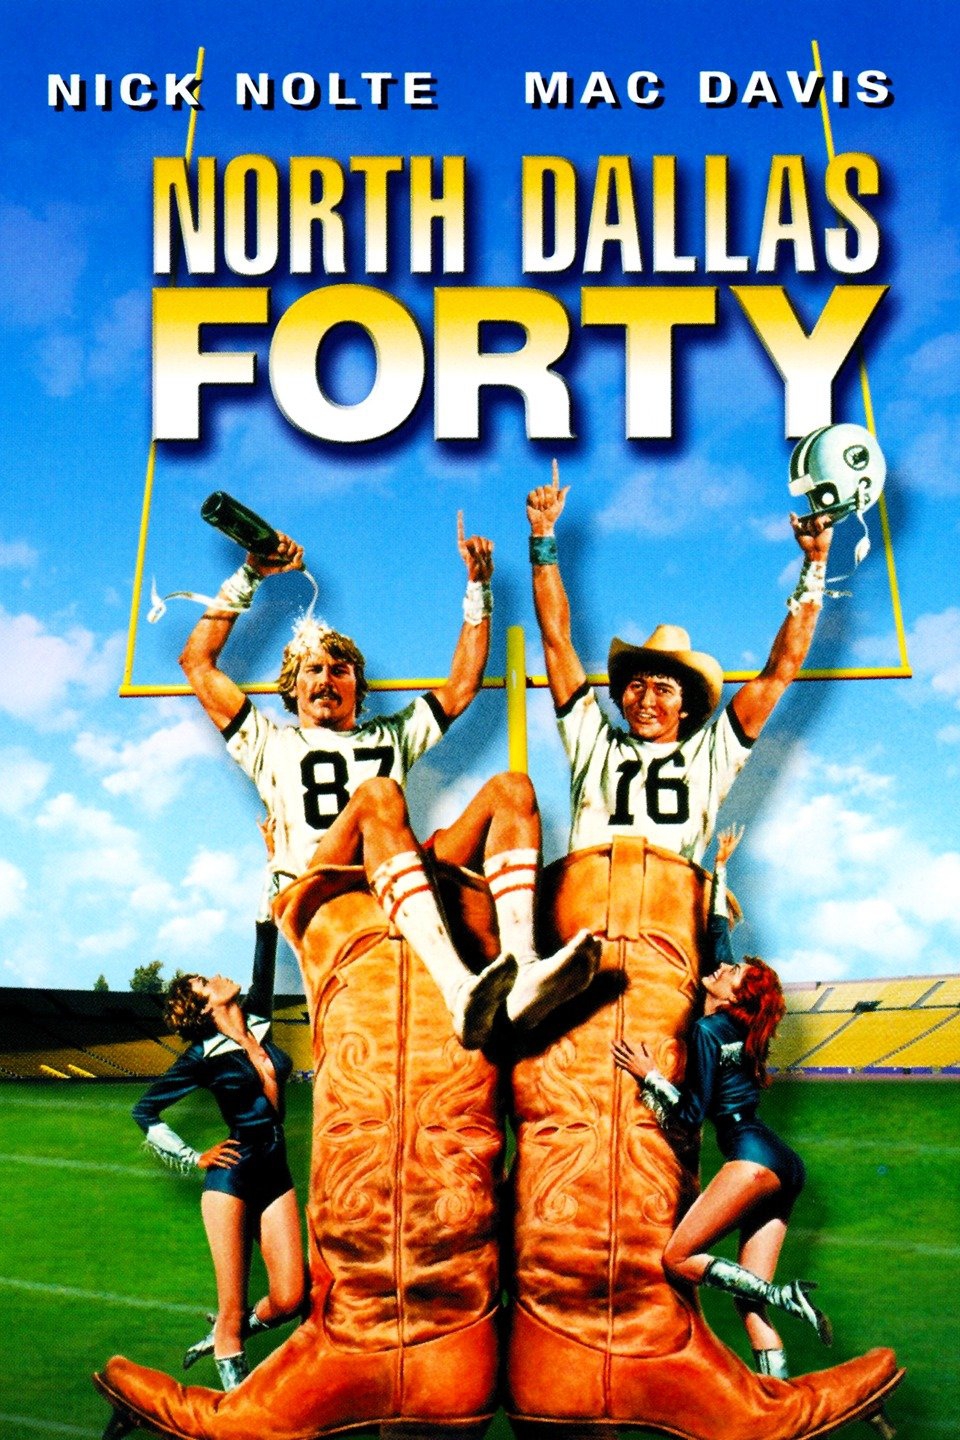 Watch North Dallas Forty (1979) Online for Free | The Roku ...